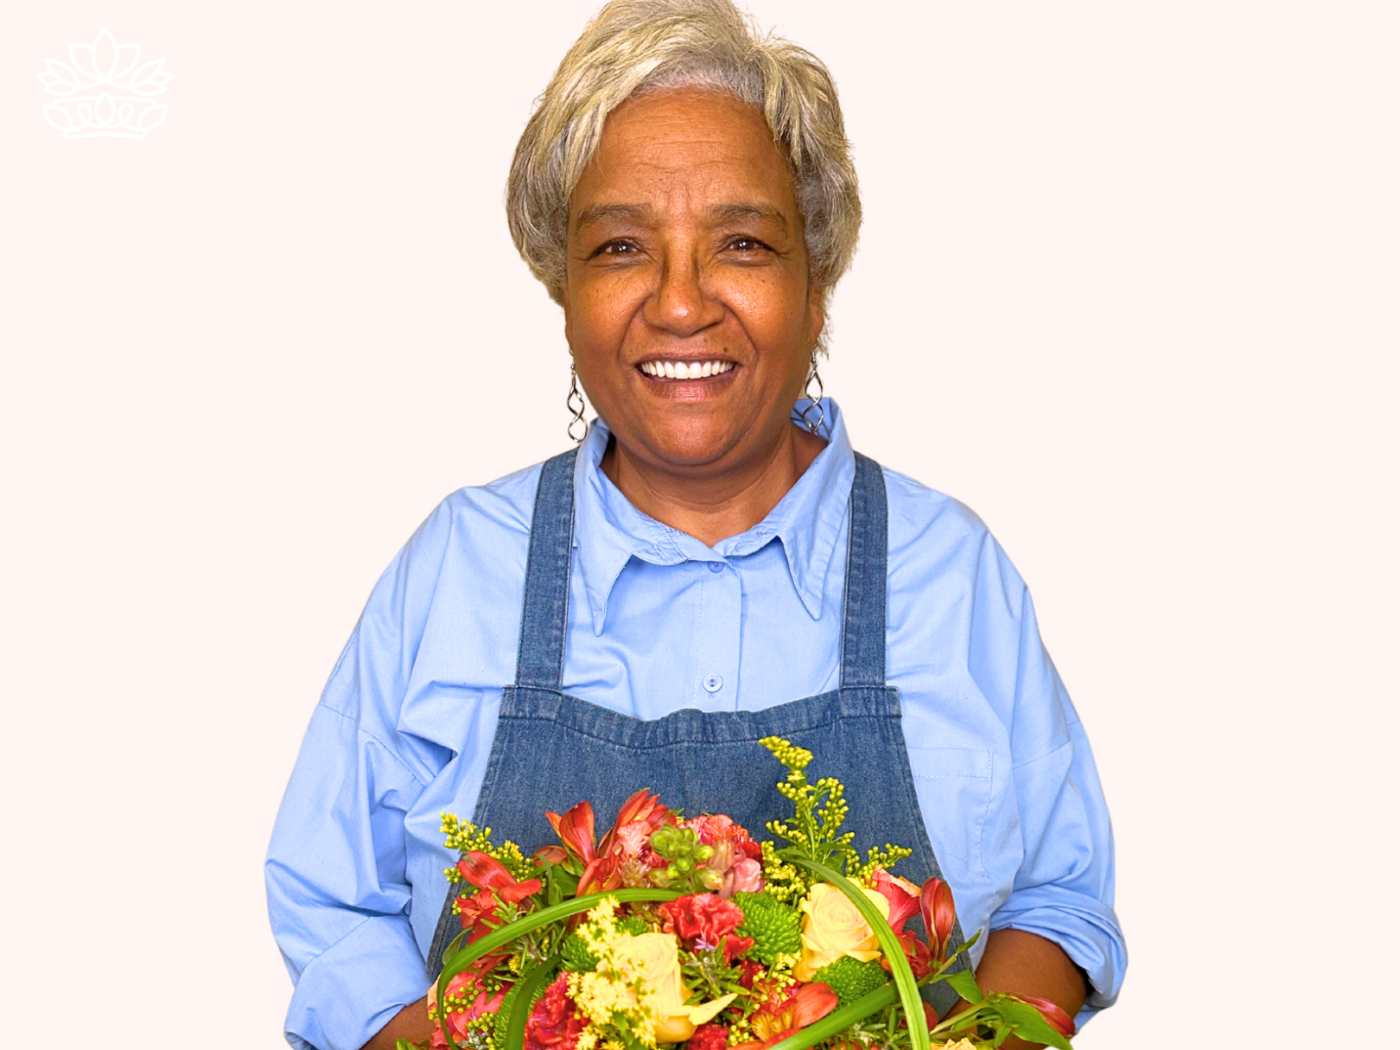 Cheerful senior florist displaying a colorful bouquet from the Florist Choice Bouquets Collection, with a guaranteed service of smiles and quality. Ideal for online orders where beautiful happenings are delivered. Fabulous Flowers and Gifts.